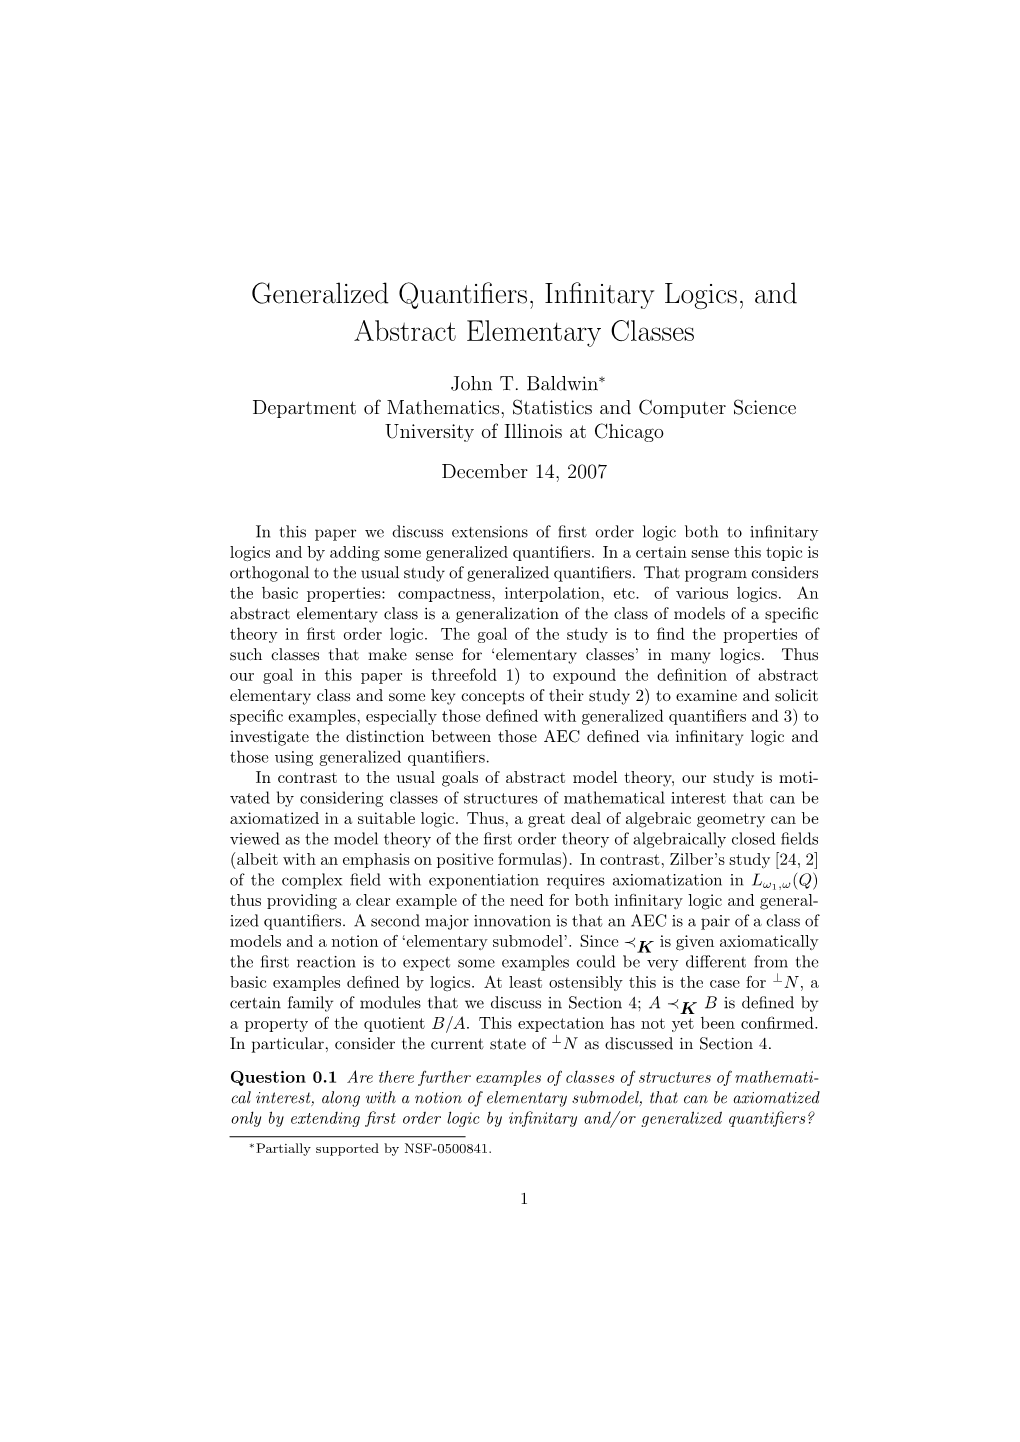 Generalized Quantifiers, Infinitary Logics, and Abstract Elementary